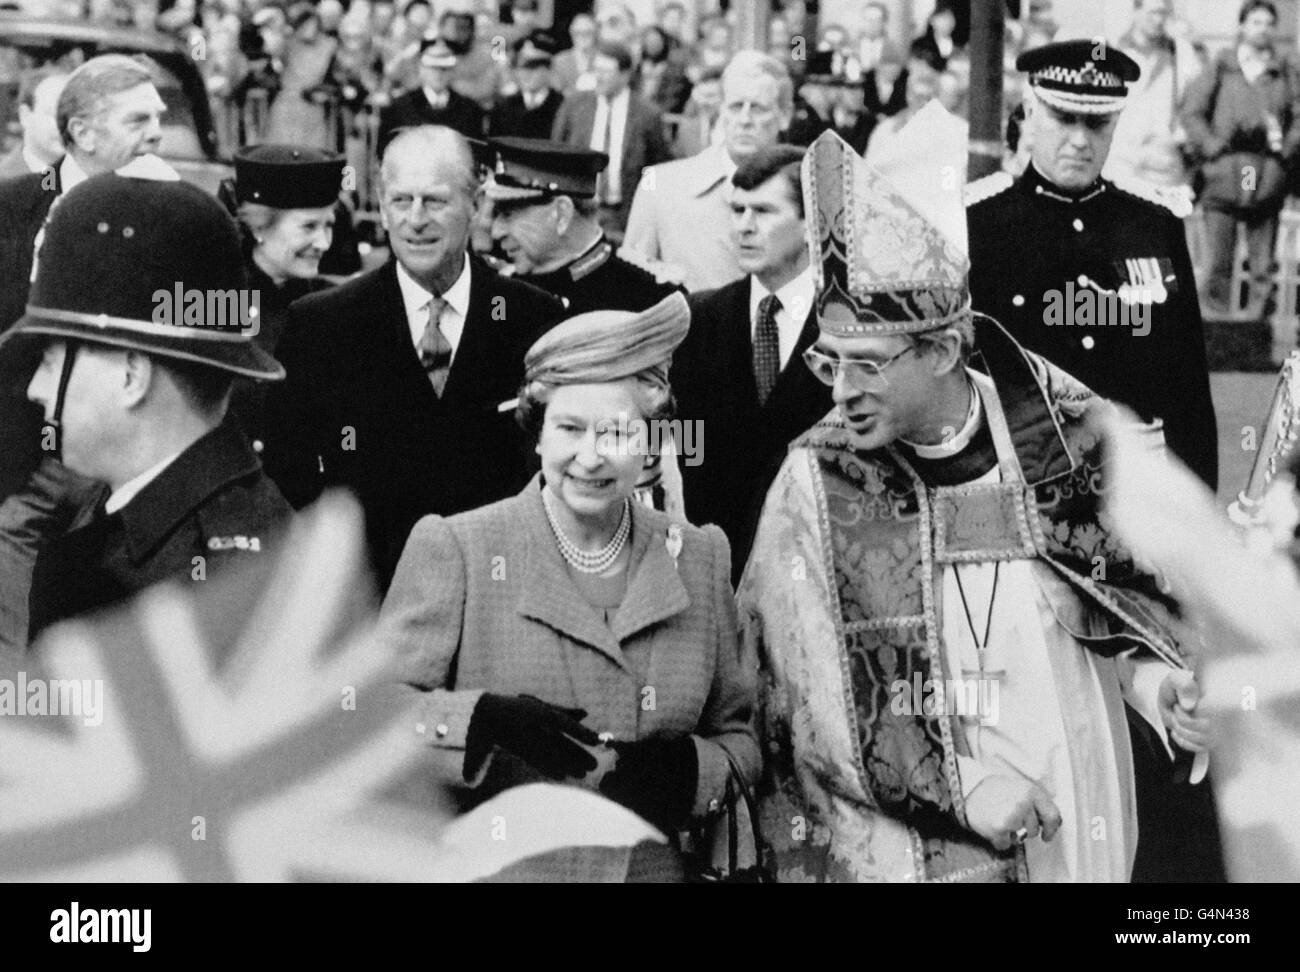 The Queen arriving at St Philip's Cathedral, Birmingham, to hand out Maundy Money in the centuries-old tradition. Prince Philip is behind her. Stock Photo